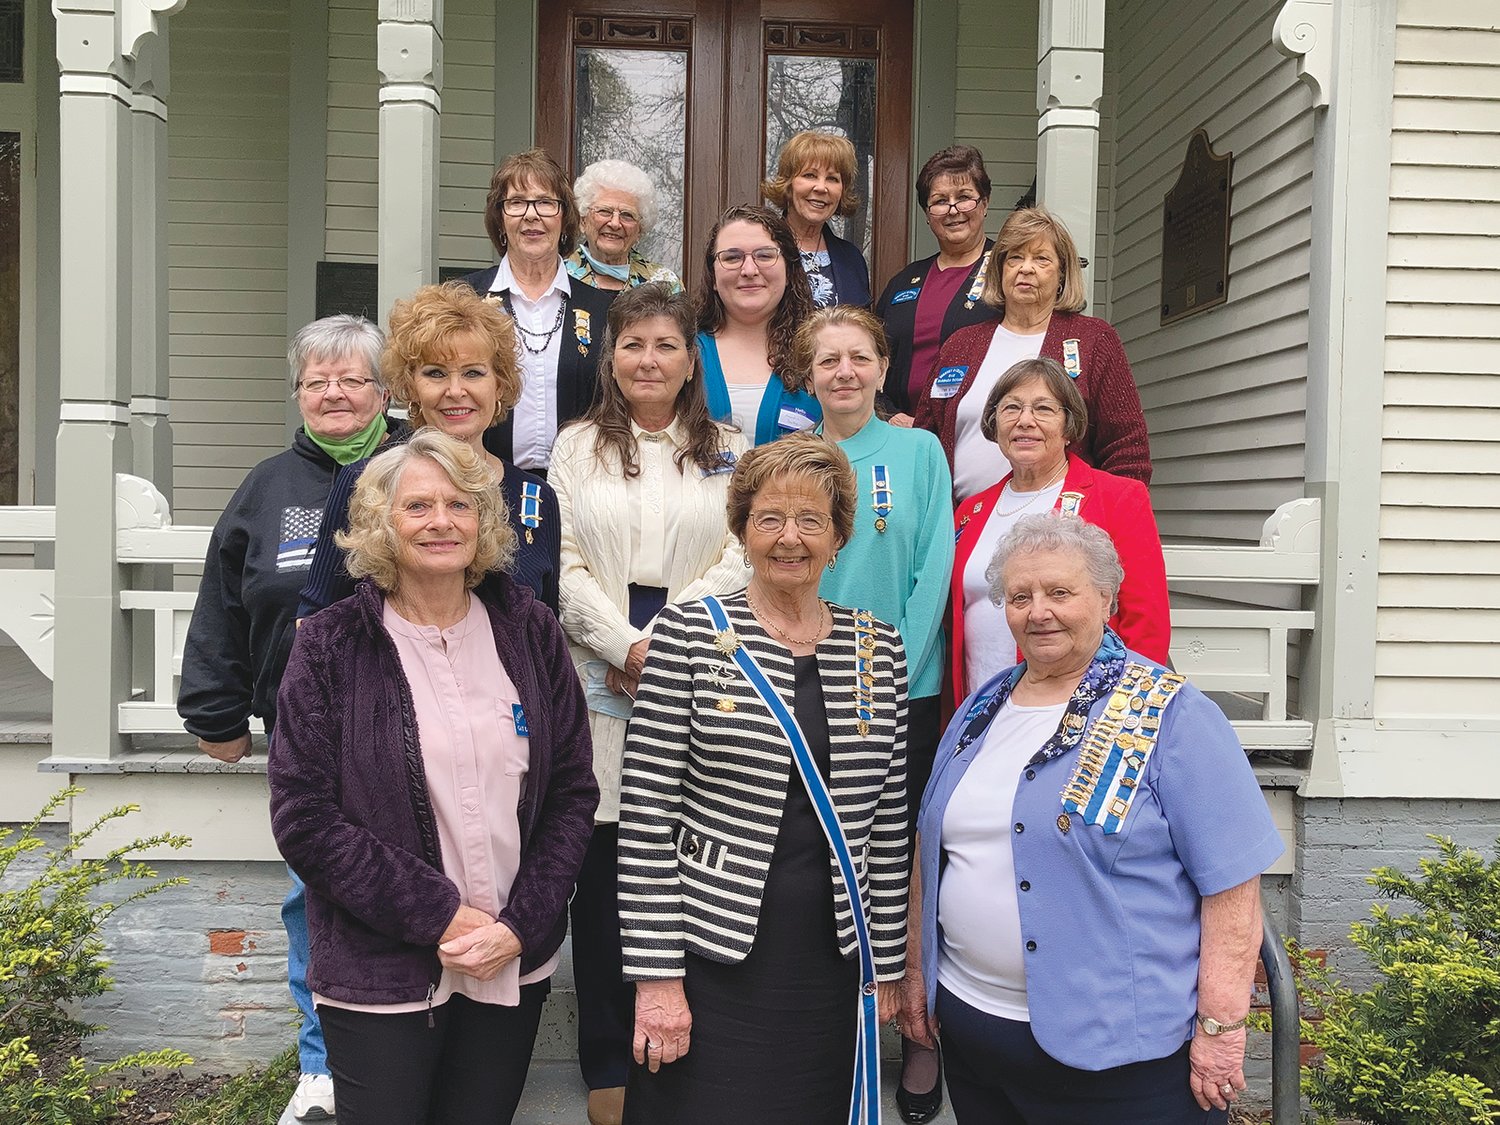 Members of the Dorothy Q Chapter Daughters of American Revolution stand on the steps of Elston Memorial Home with state regent Charlotte Blair on Saturday. The organization dedicated a plaque honoring Revolutionary War veterans at the local chapter house.